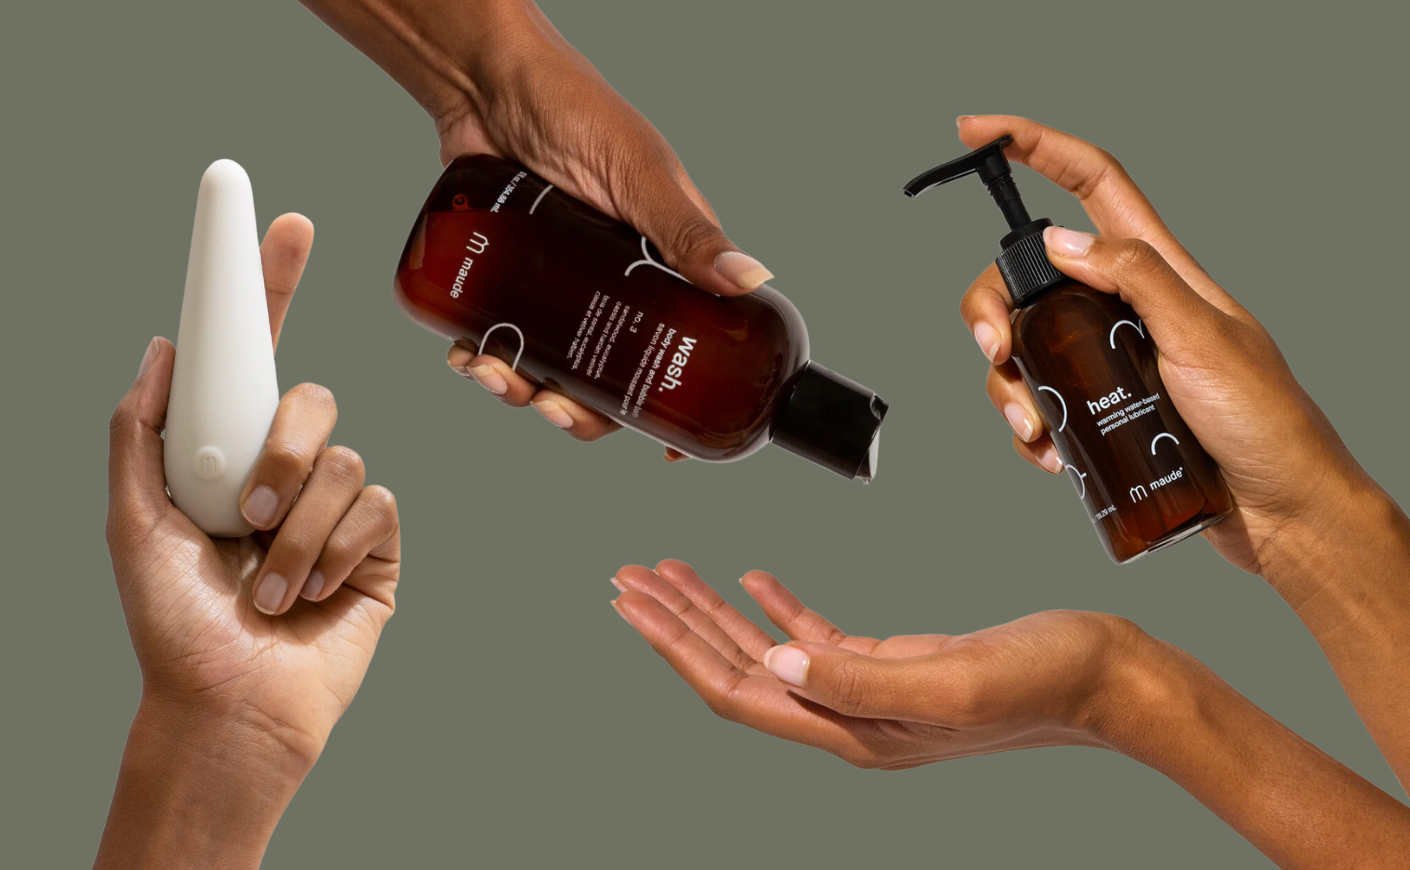 hands holding various maude products